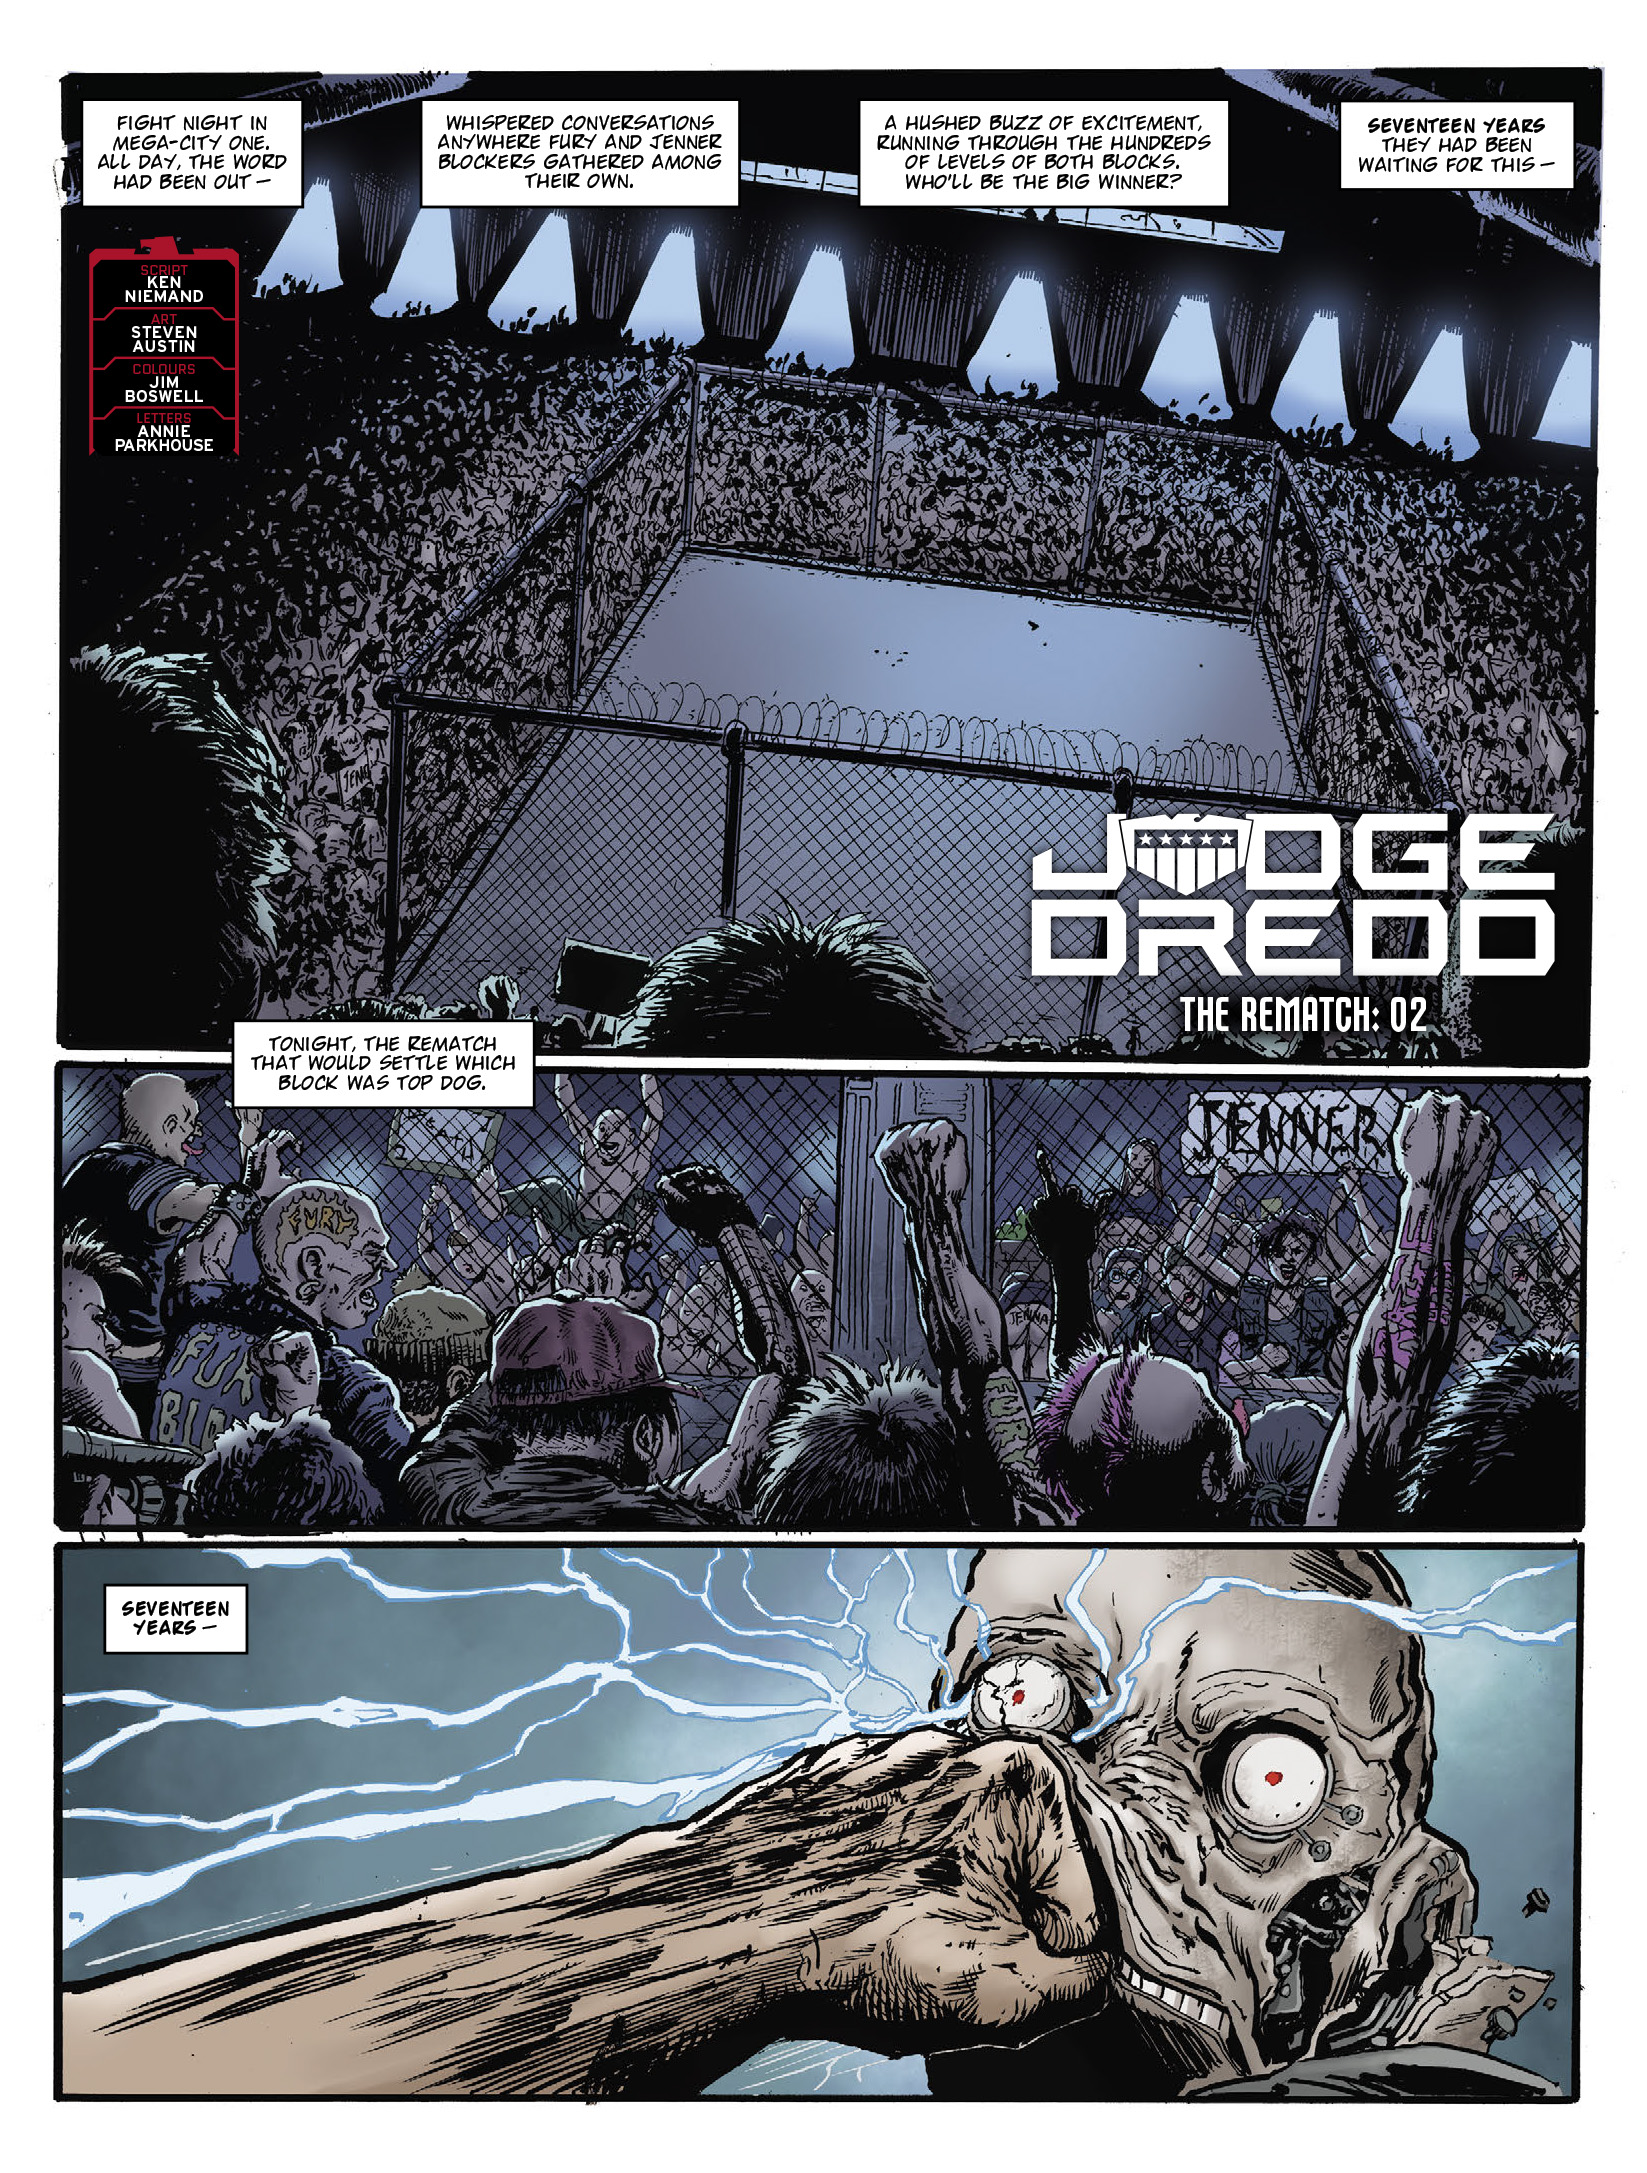 2000 AD: Chapter 2311 - Page 3